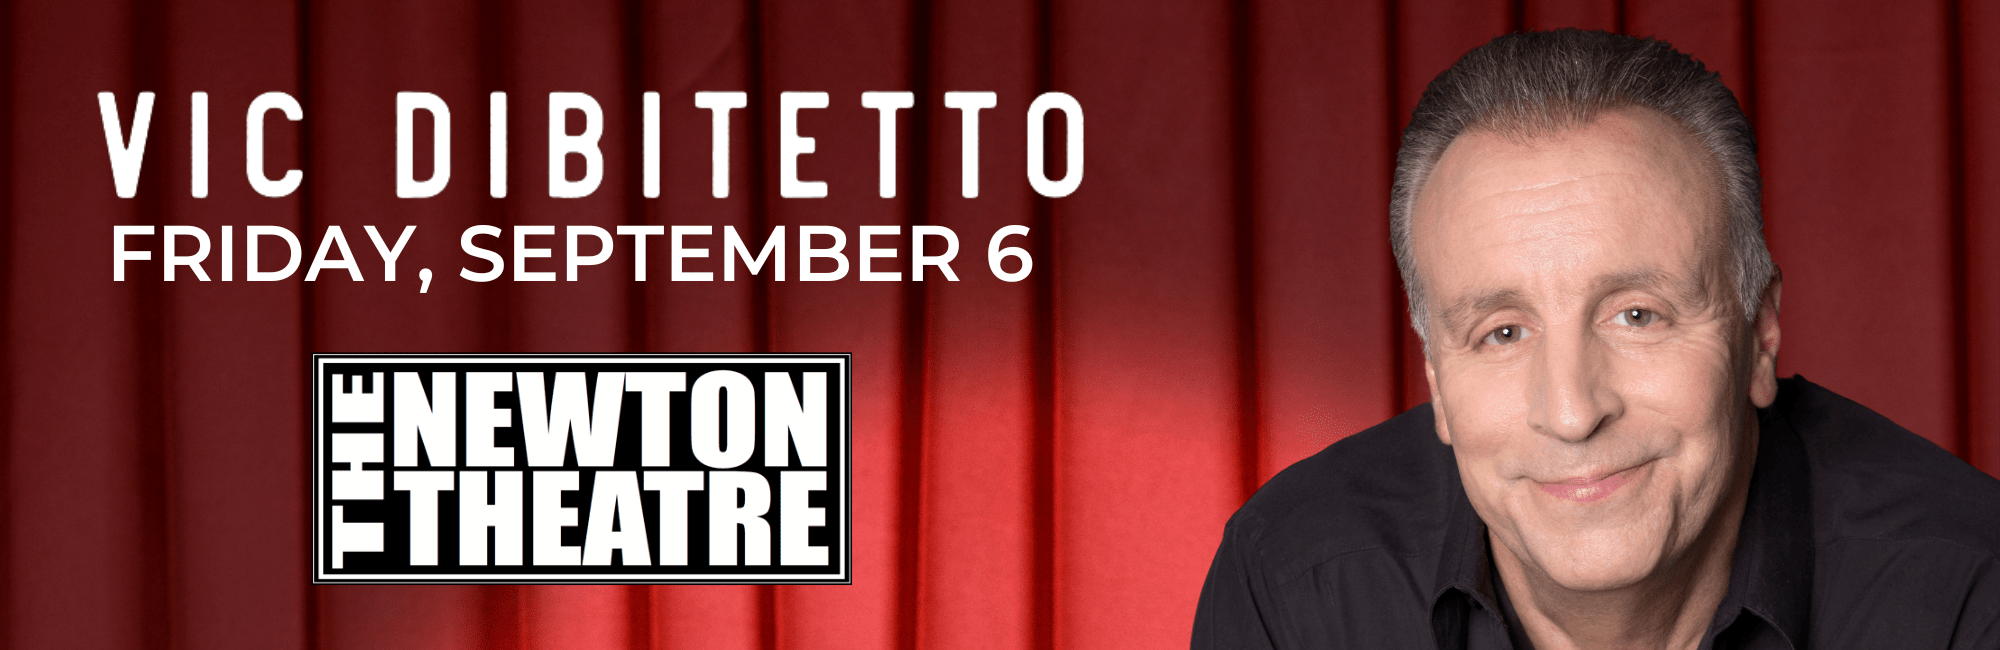 Vic DiBitetto comes to The Newton Theatre on Friday, September 6th.